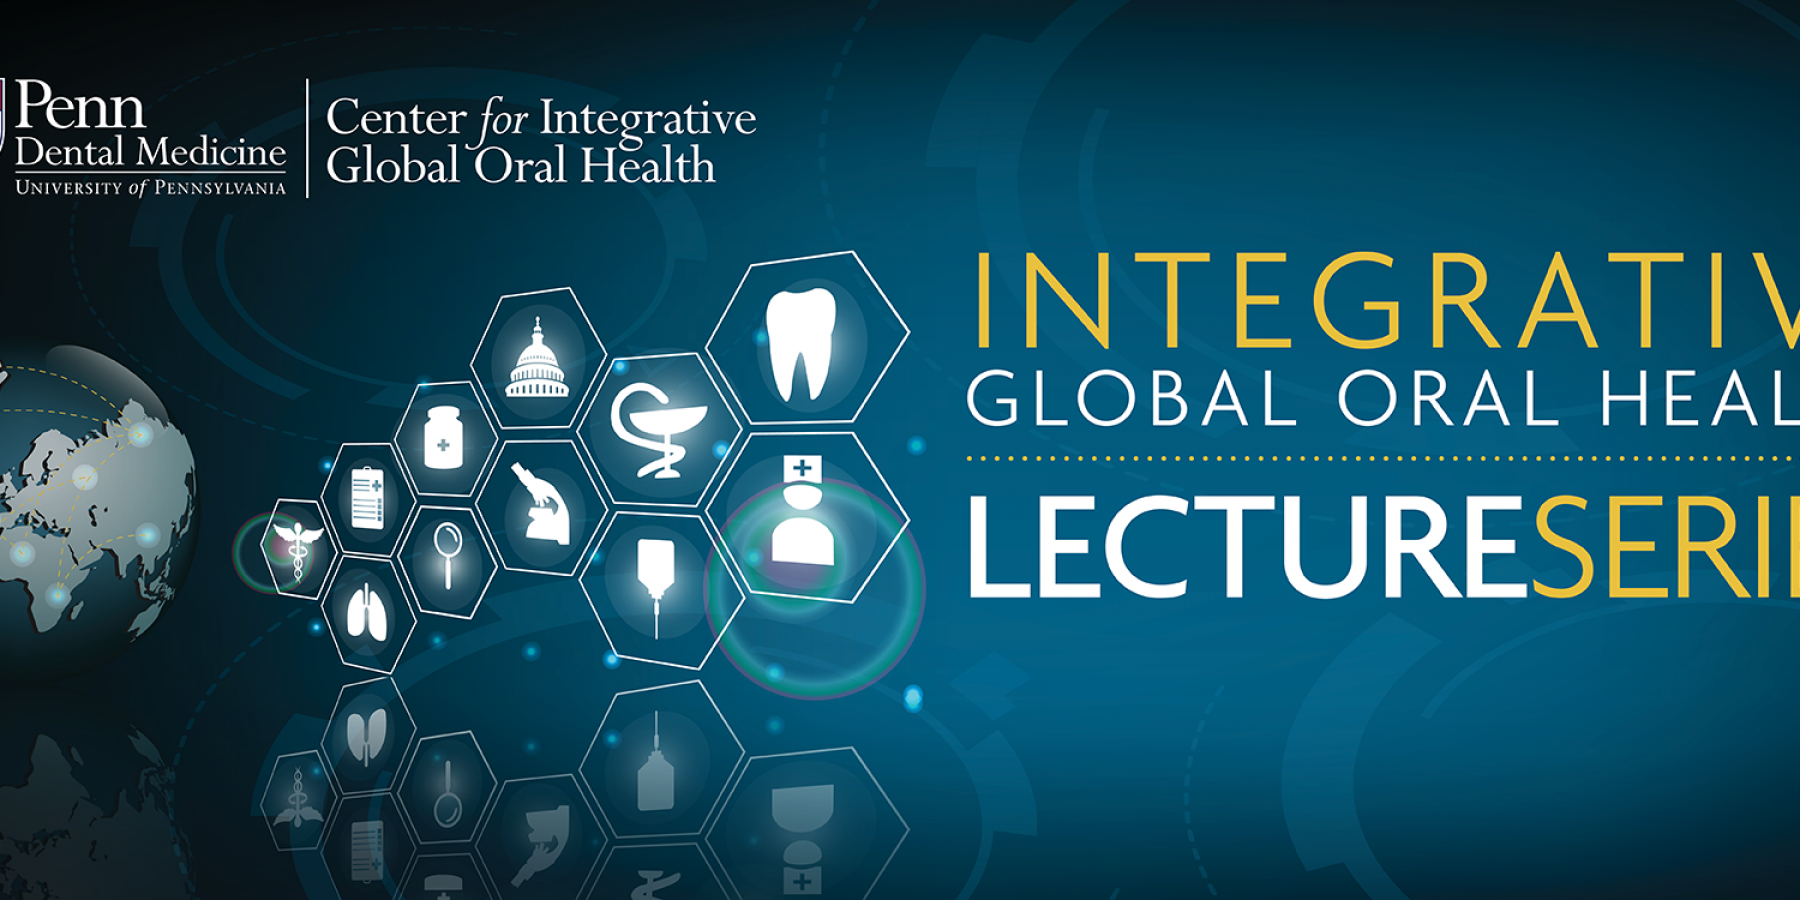 Center for Integrative Global Oral Health Lecture Series